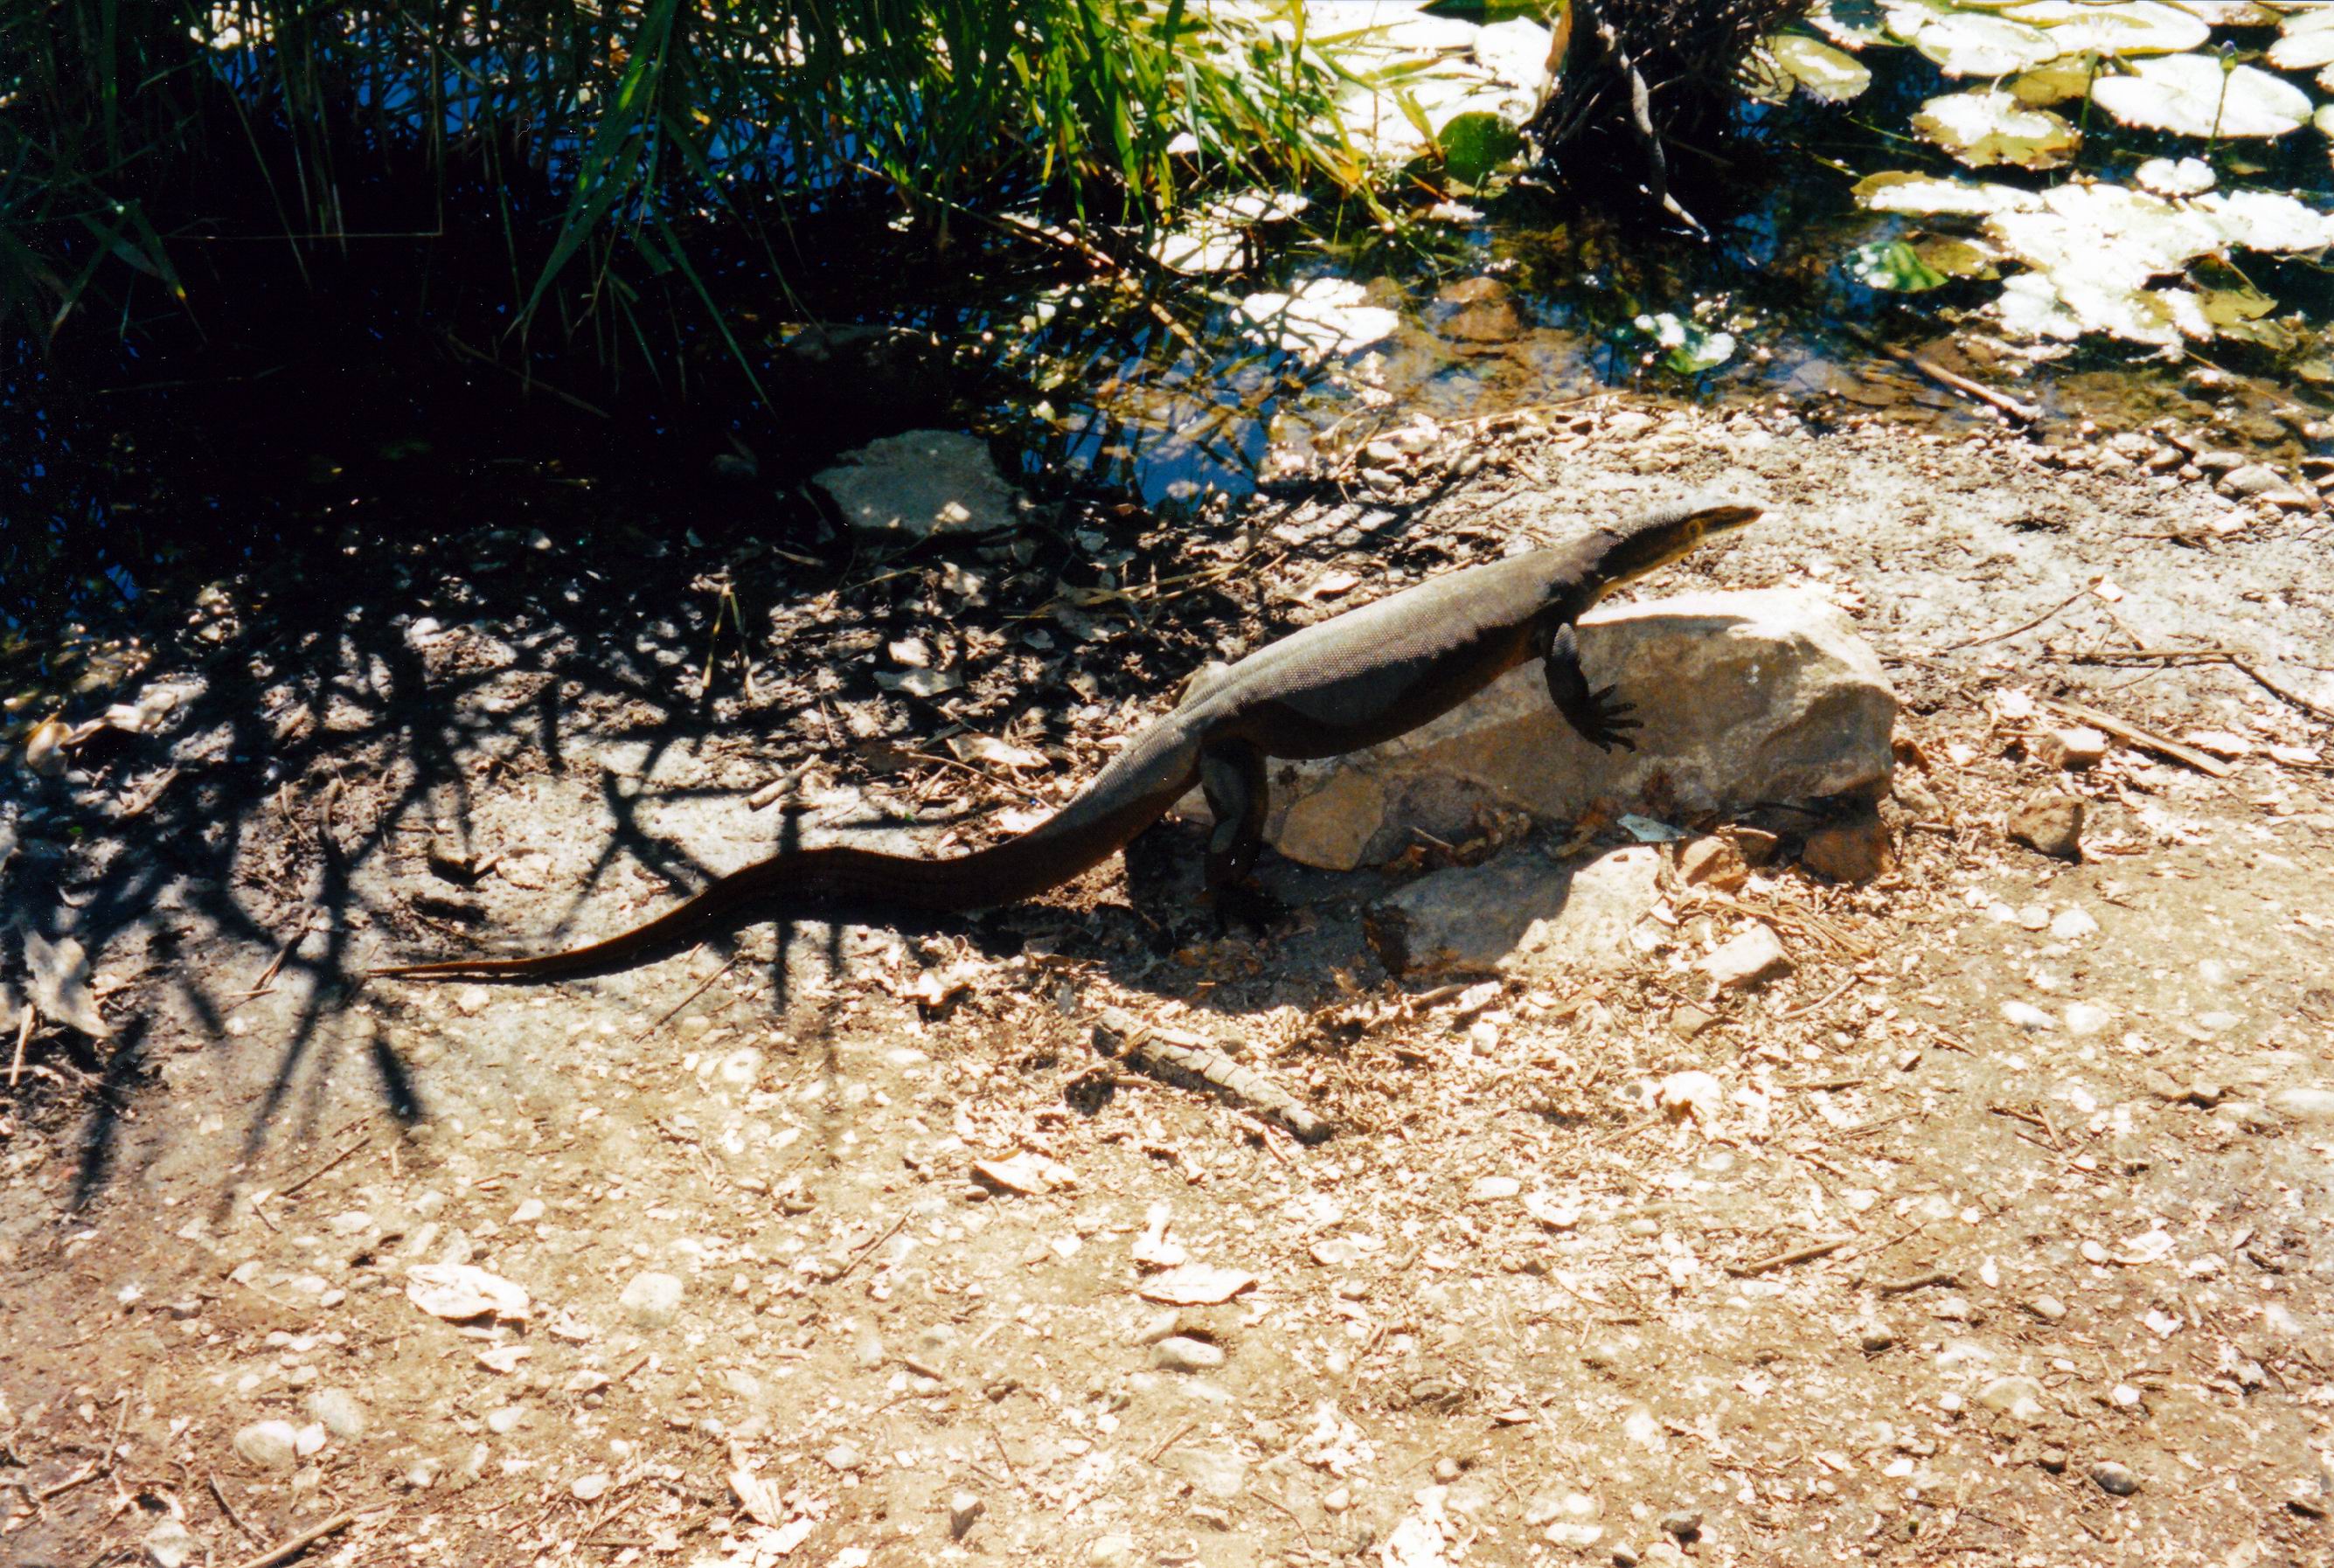 Resize of 06-06-2003 04 water monitor lawn hill nat park.jpg